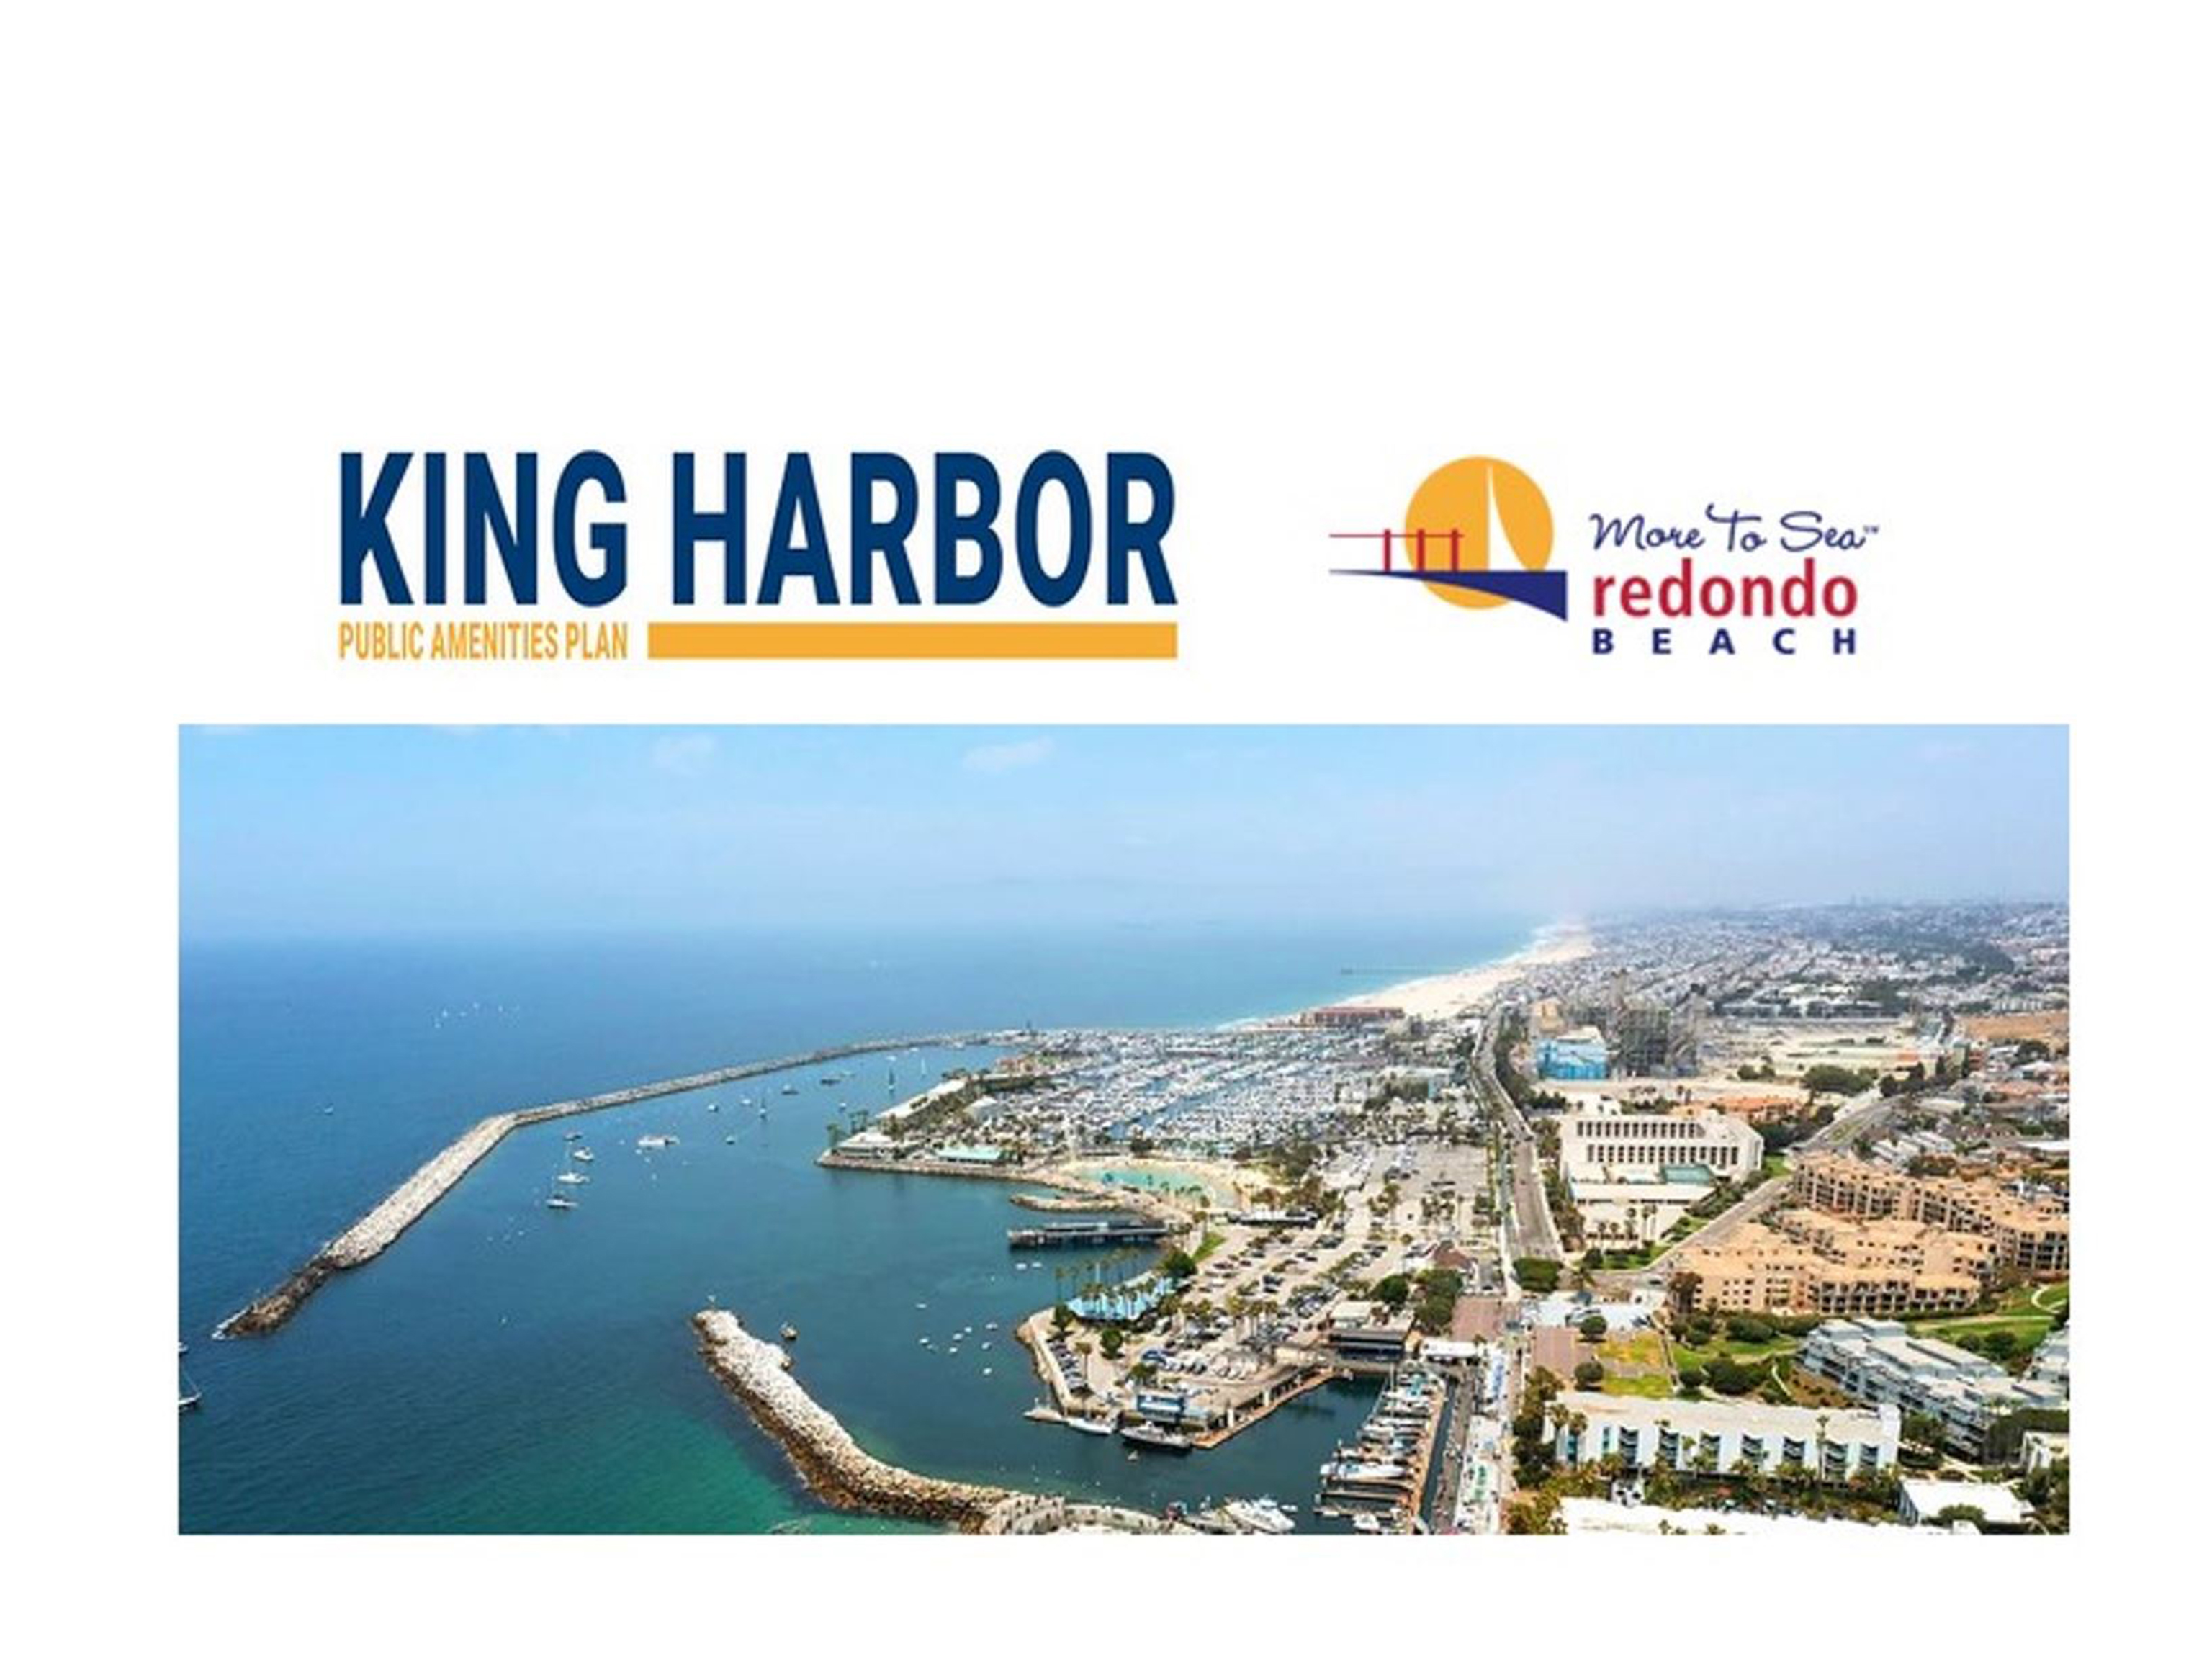 Join The King Harbor Amenities Hybrid Meeting May 31st at 6:30 PM